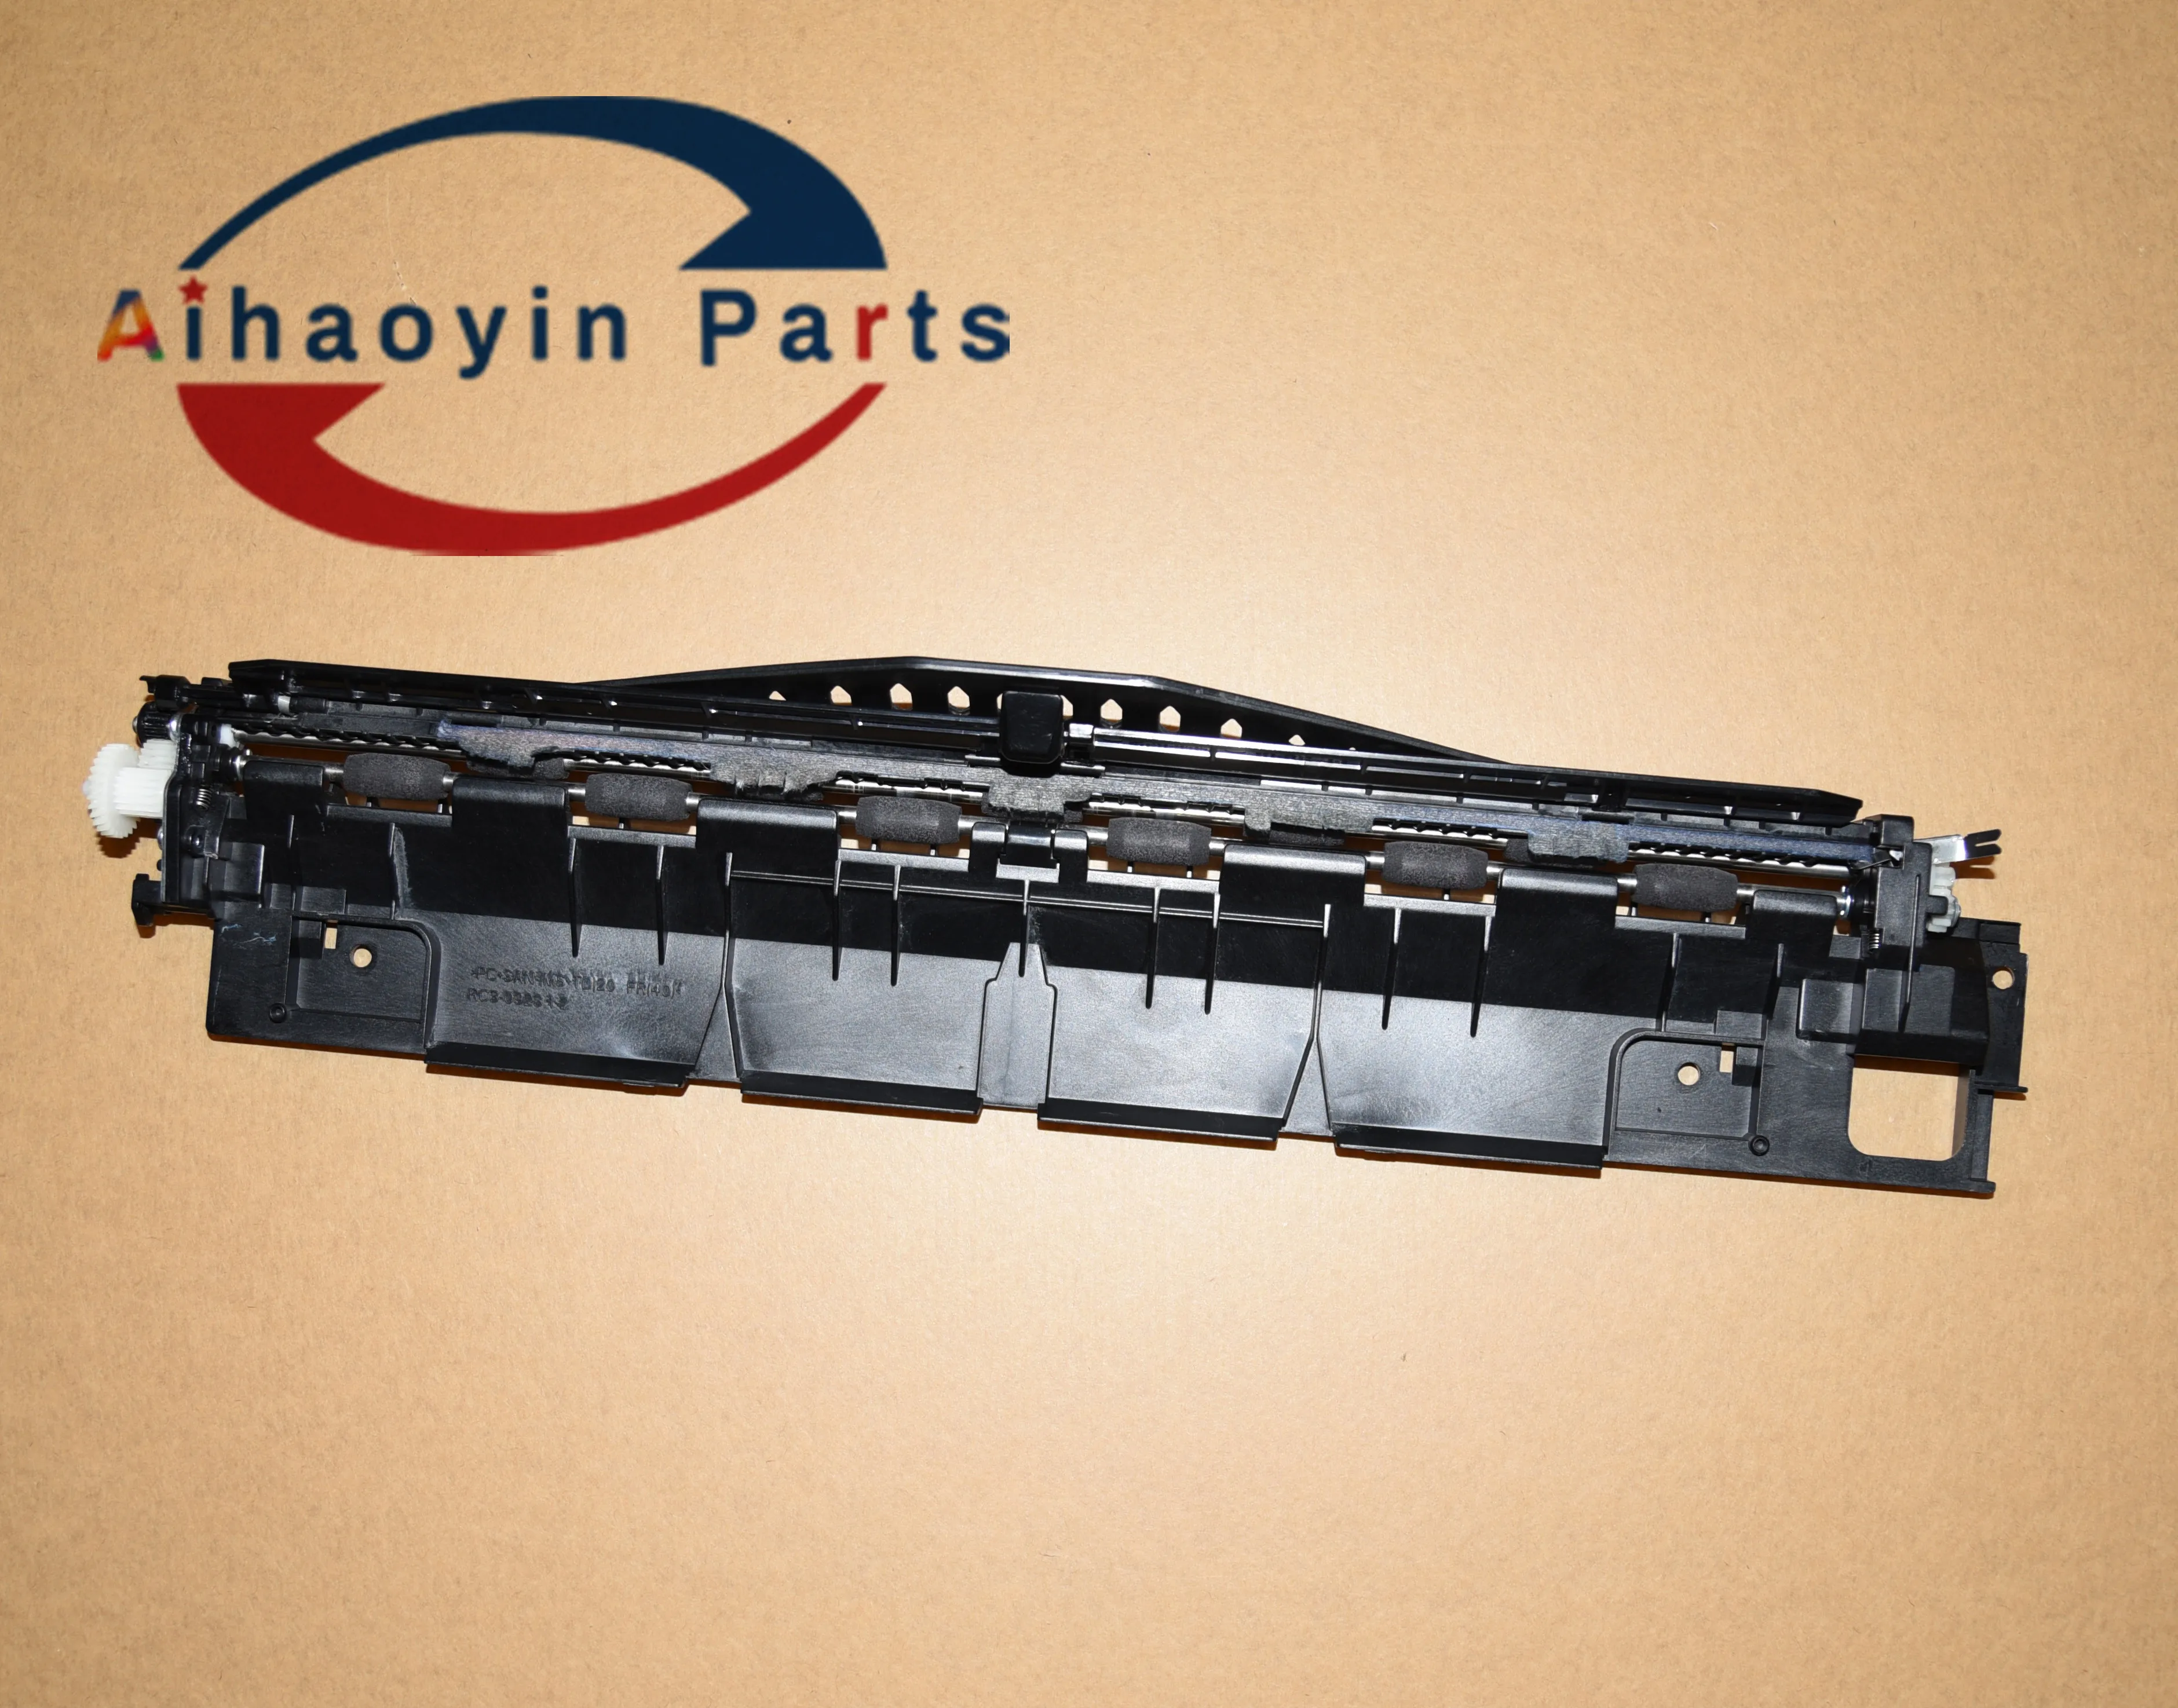 

Paper Delivery Assembly For HP CP5220 CP5520 CP5225 CP5525 M750 5220 5225 5520 5525 750 dn n xh Serise RM1-6165 RM1-6165-000CN